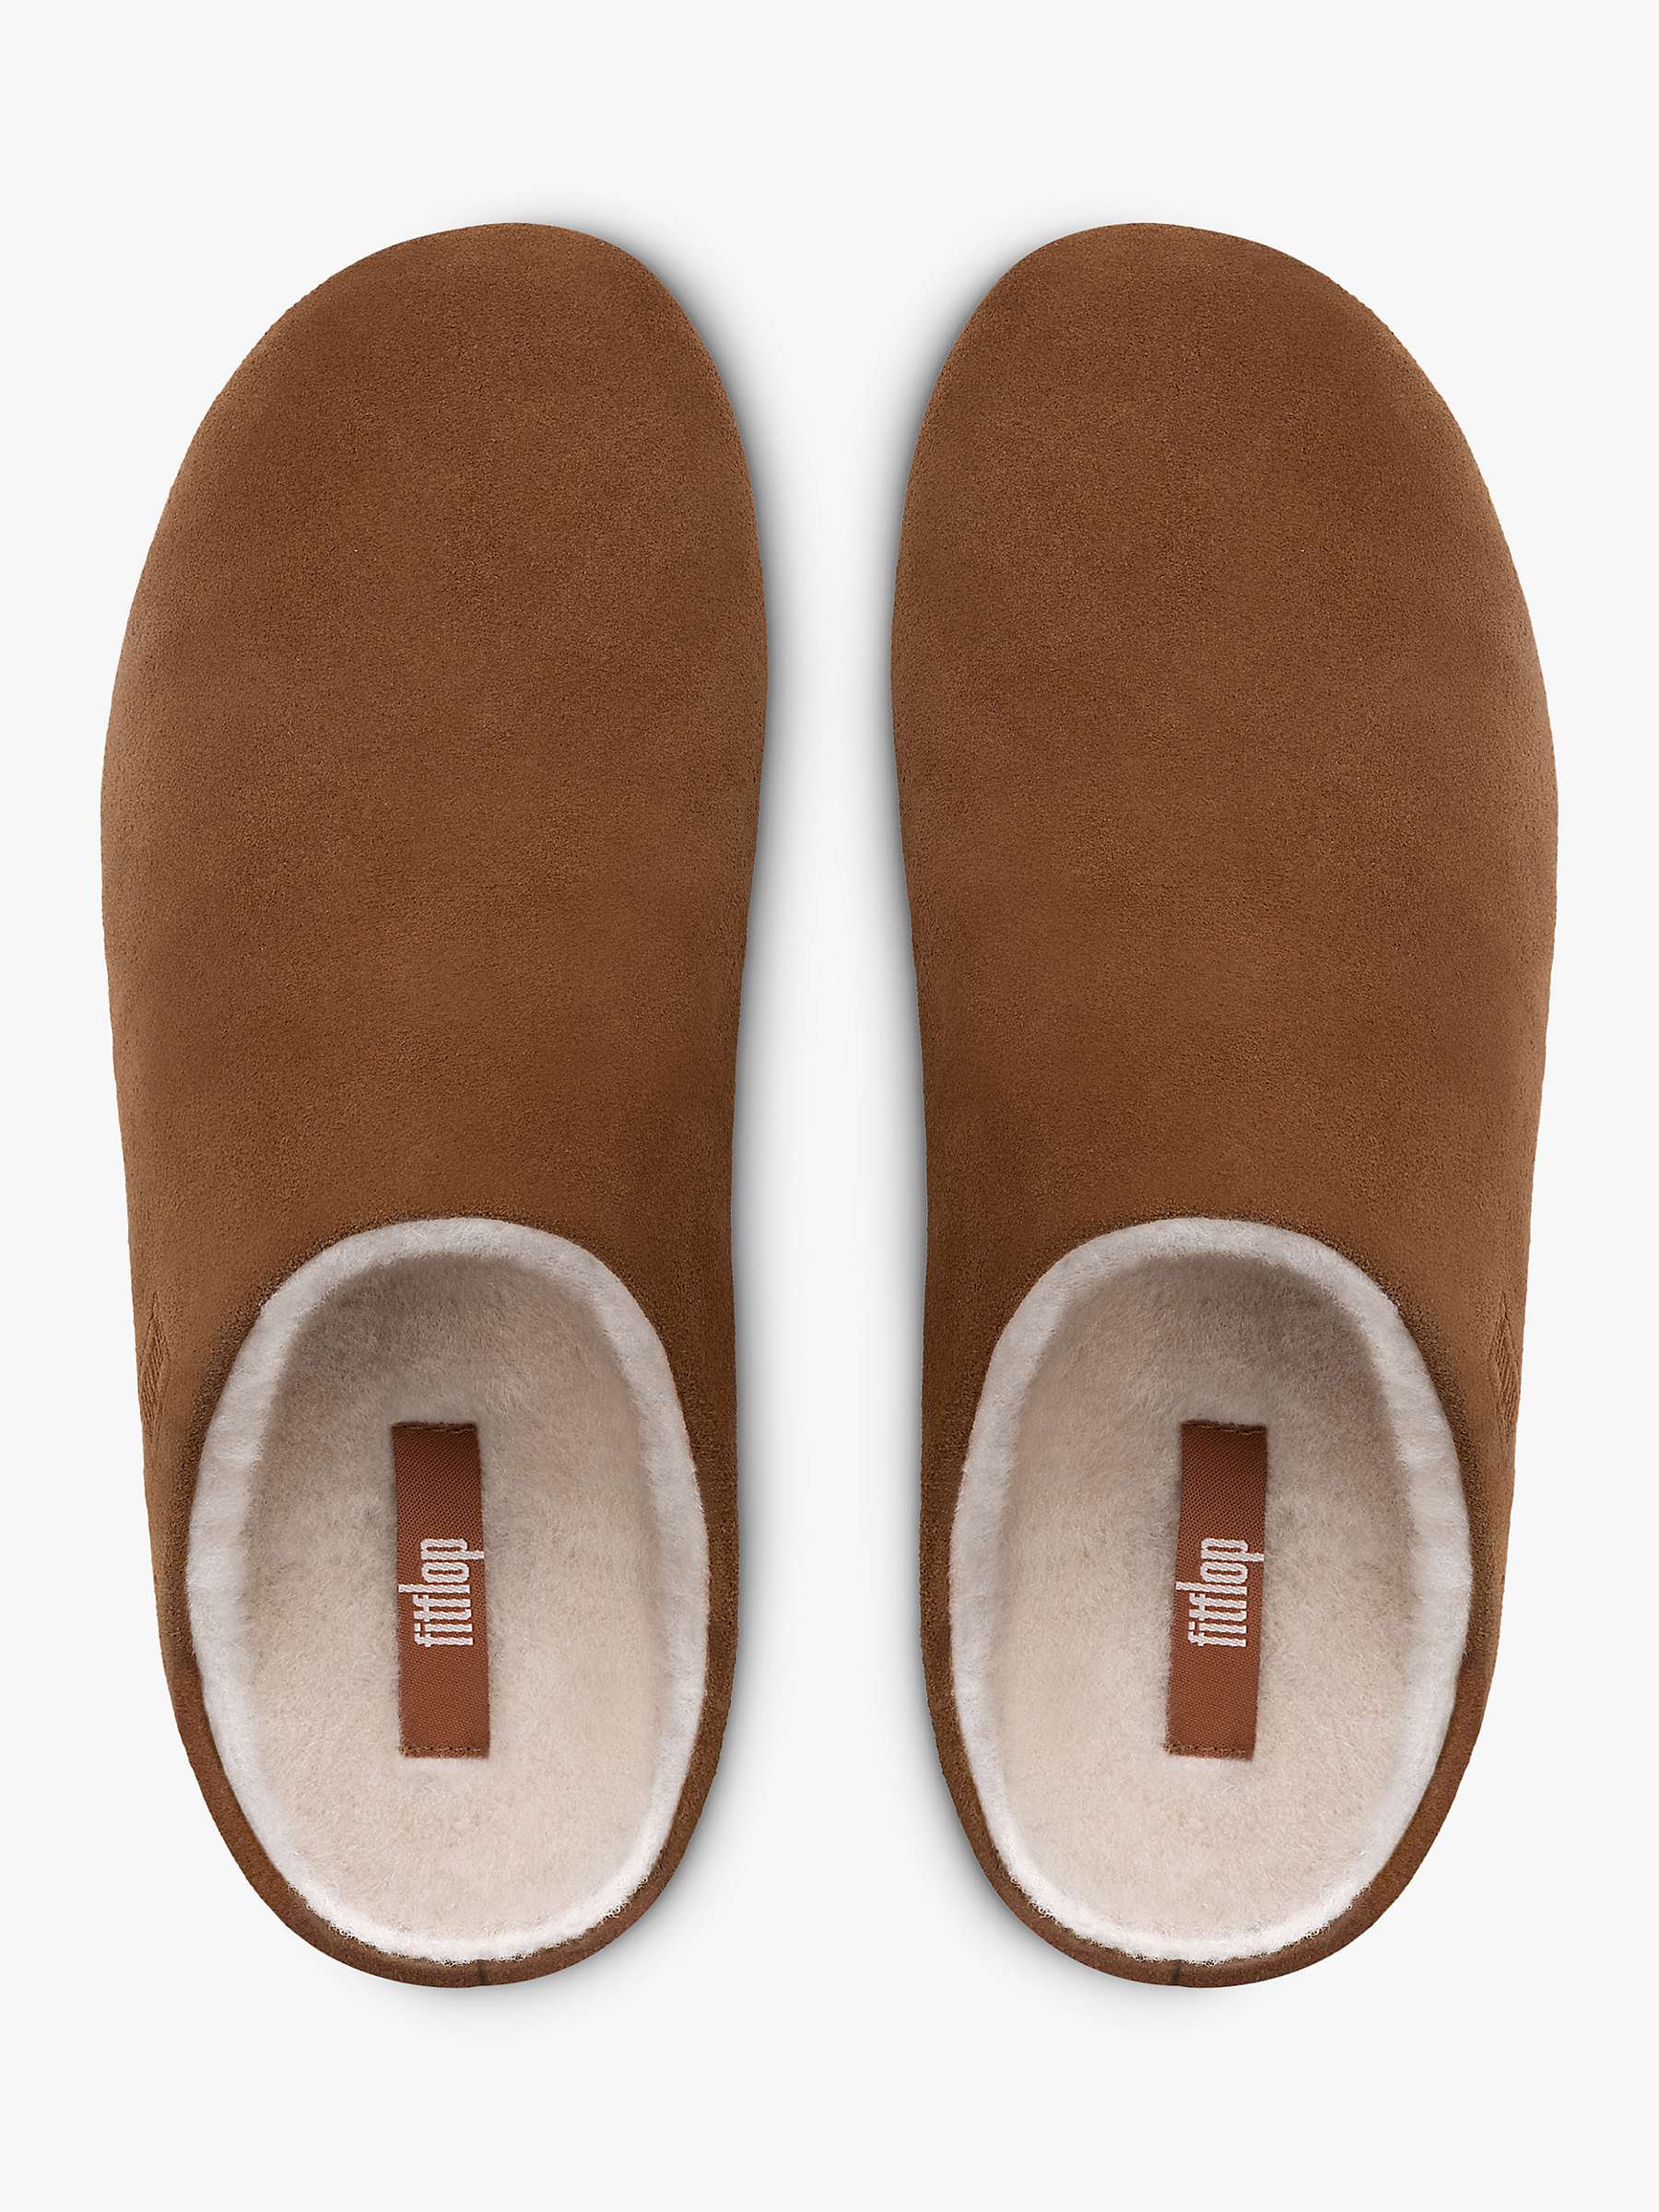 Buy FitFlop Chrissie Shearling Lined Suede Slippers Online at johnlewis.com